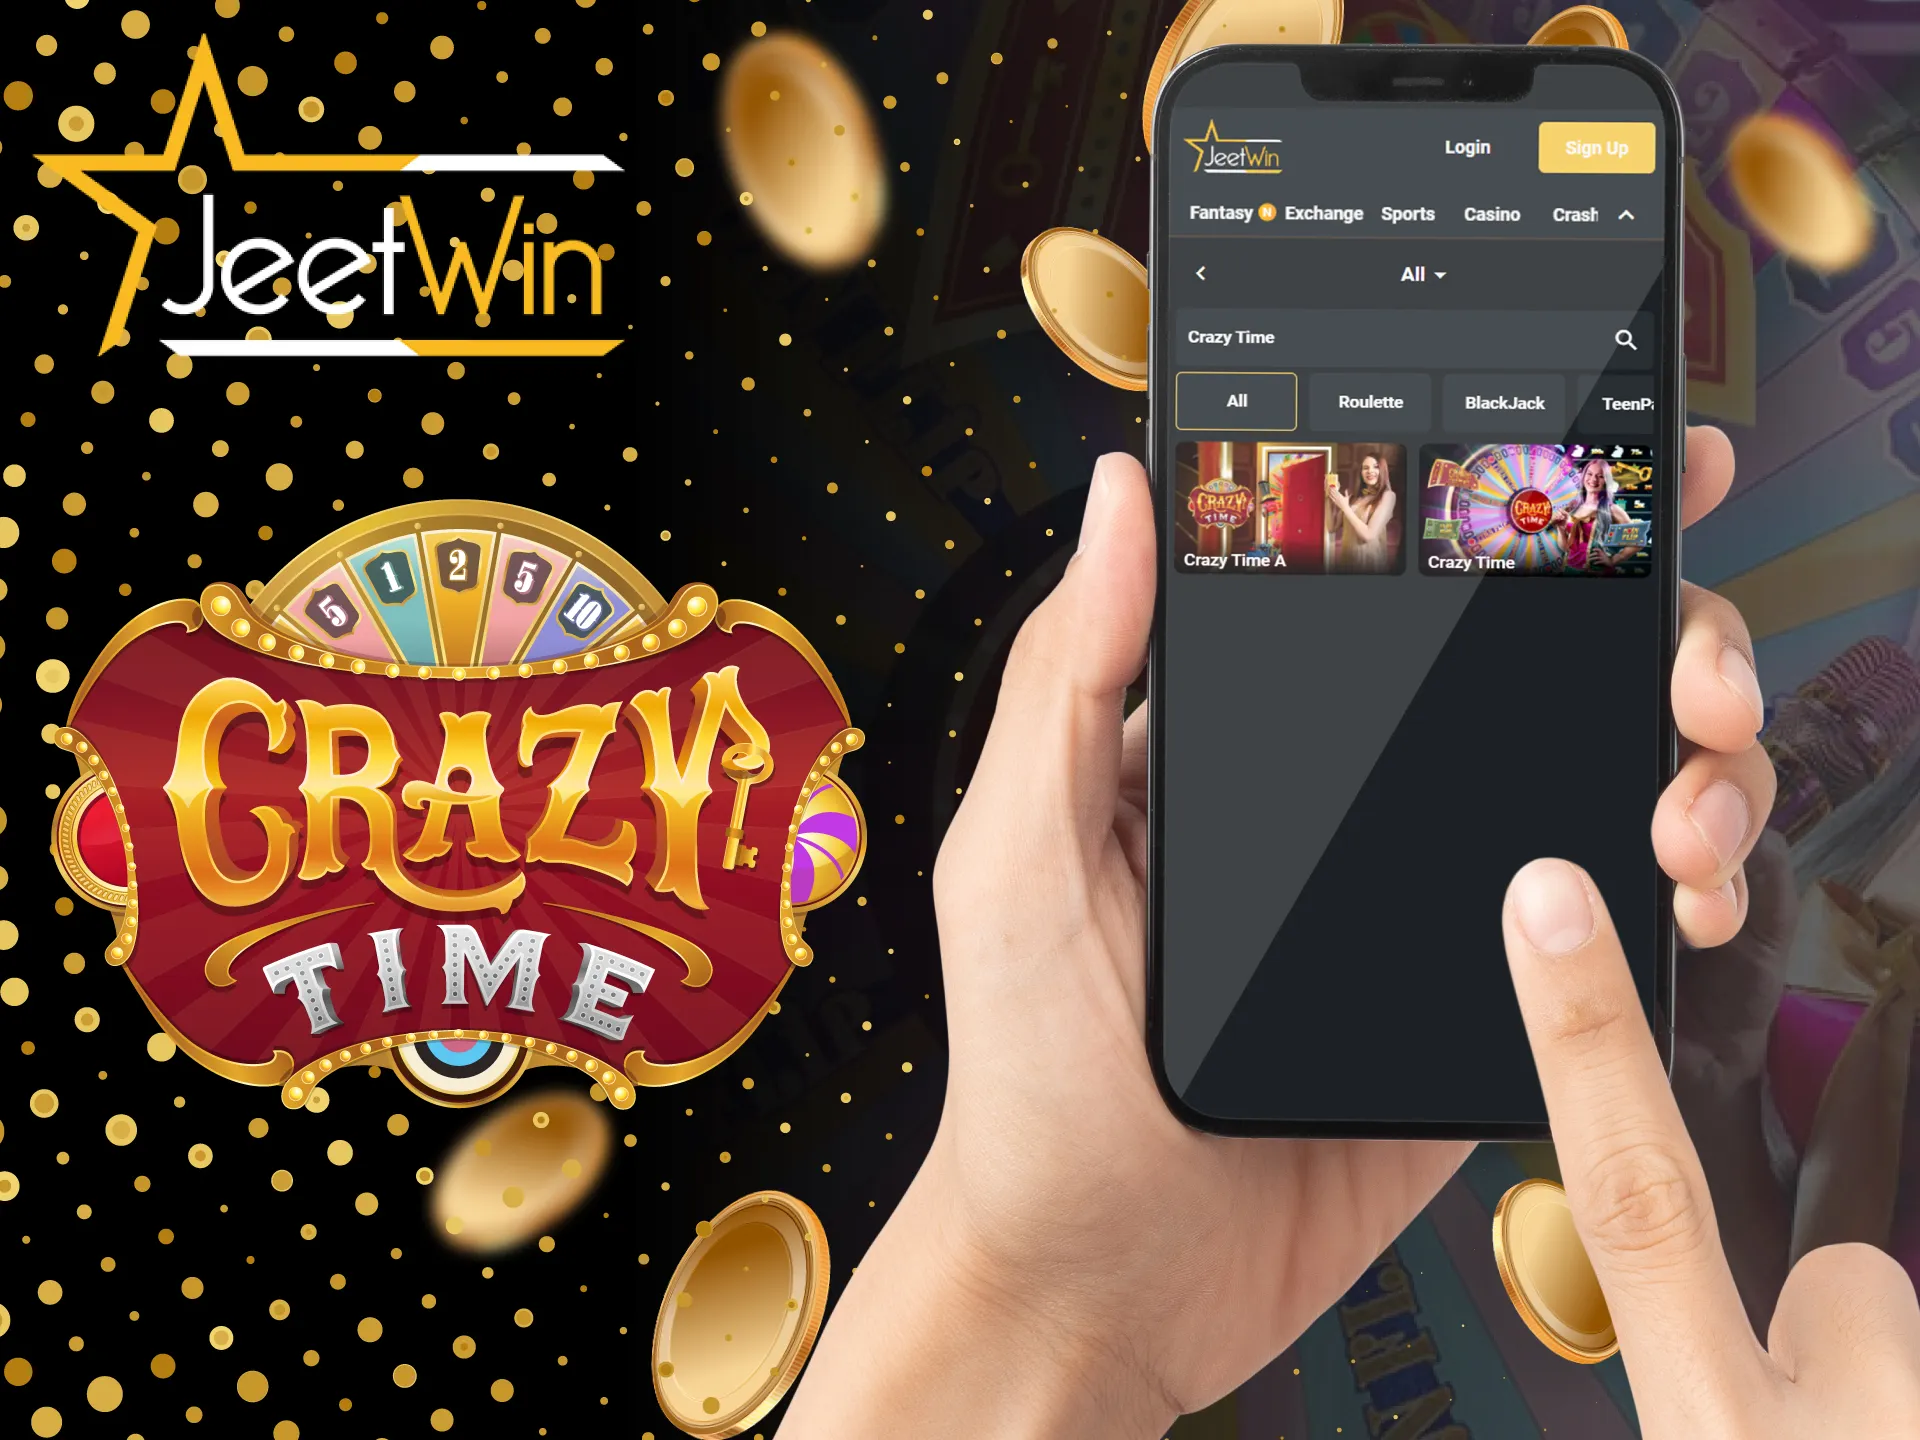 Play Crazy Time on your smartphone with the JeetWin mobile app.